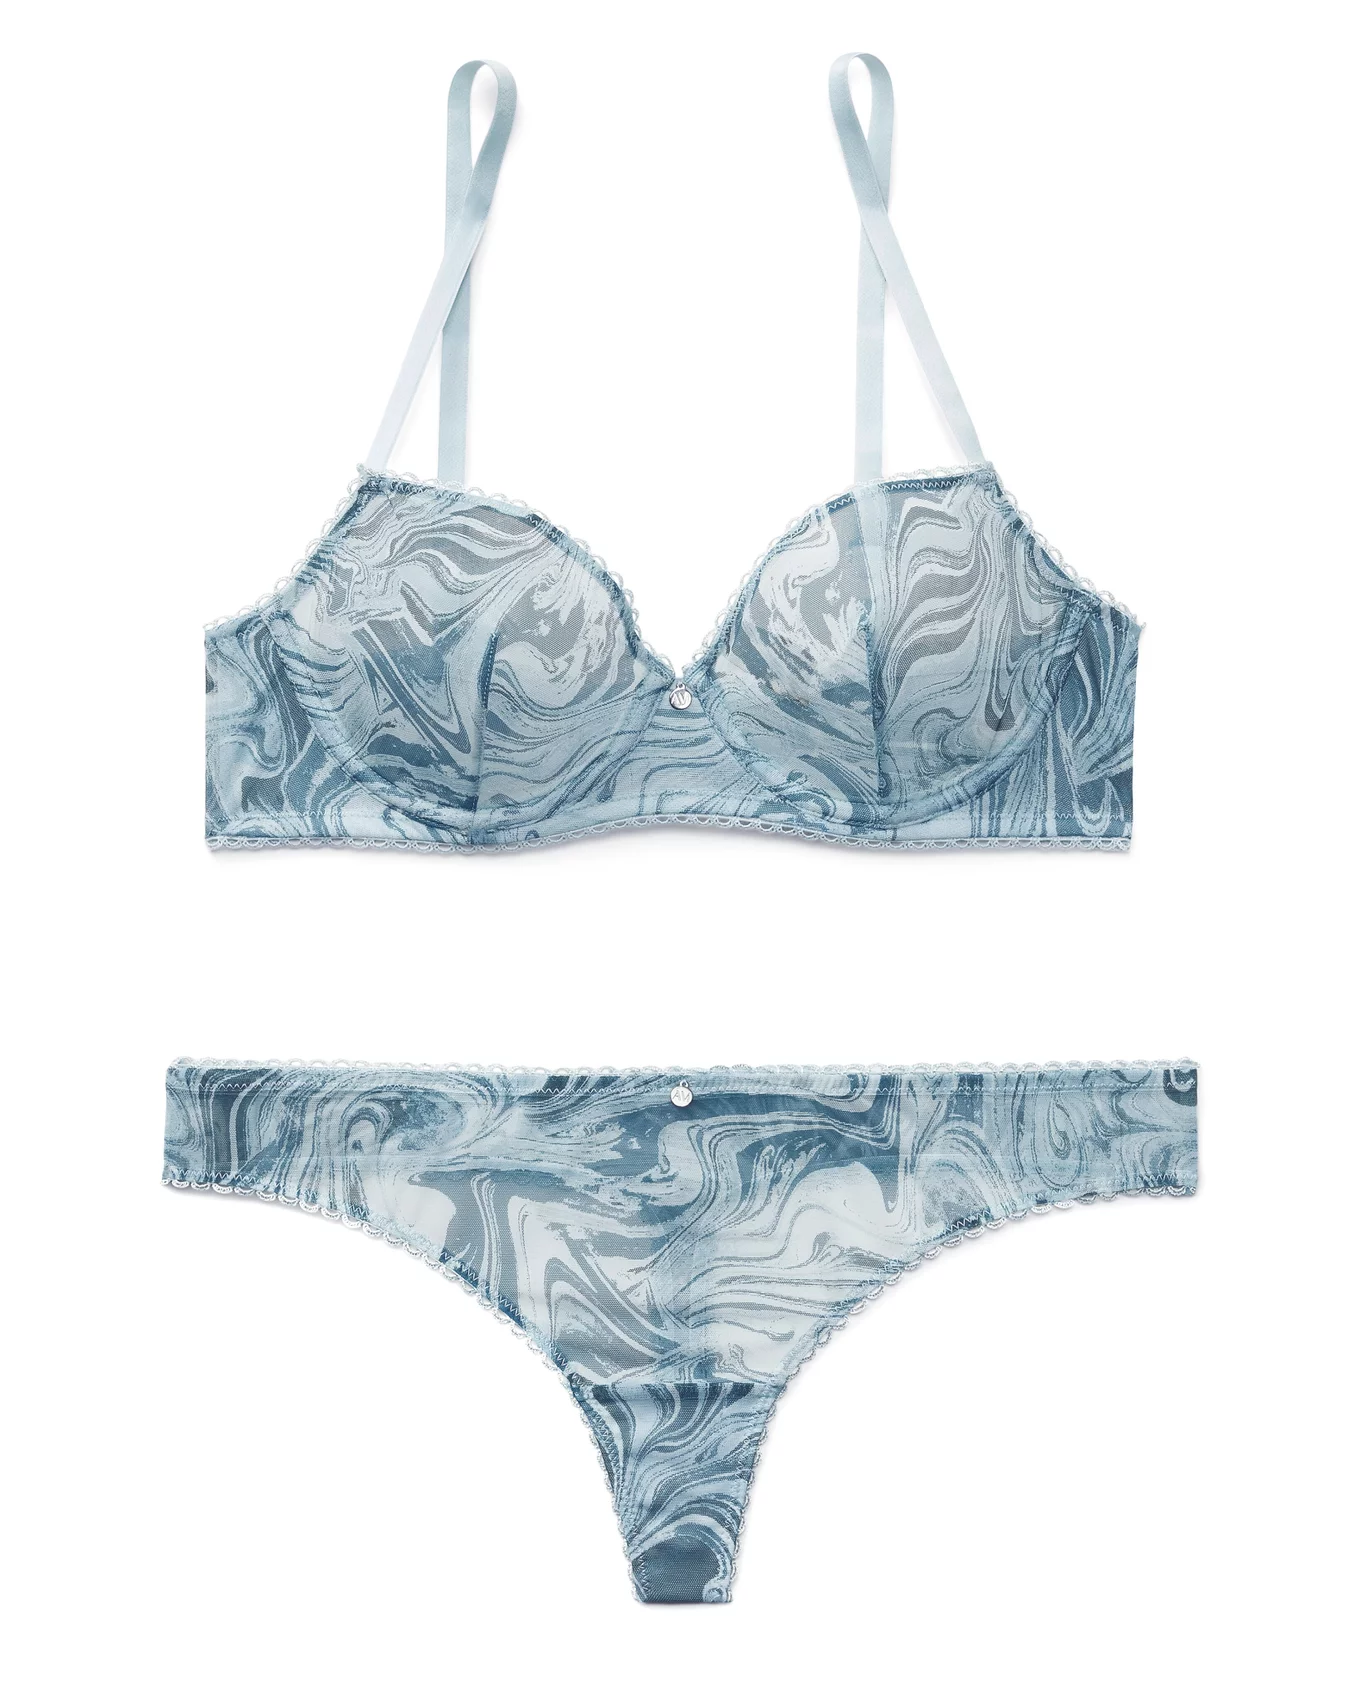 Victoria's Secret Dream Angels Lined Demi Shiny Silver Bra and Panty Set